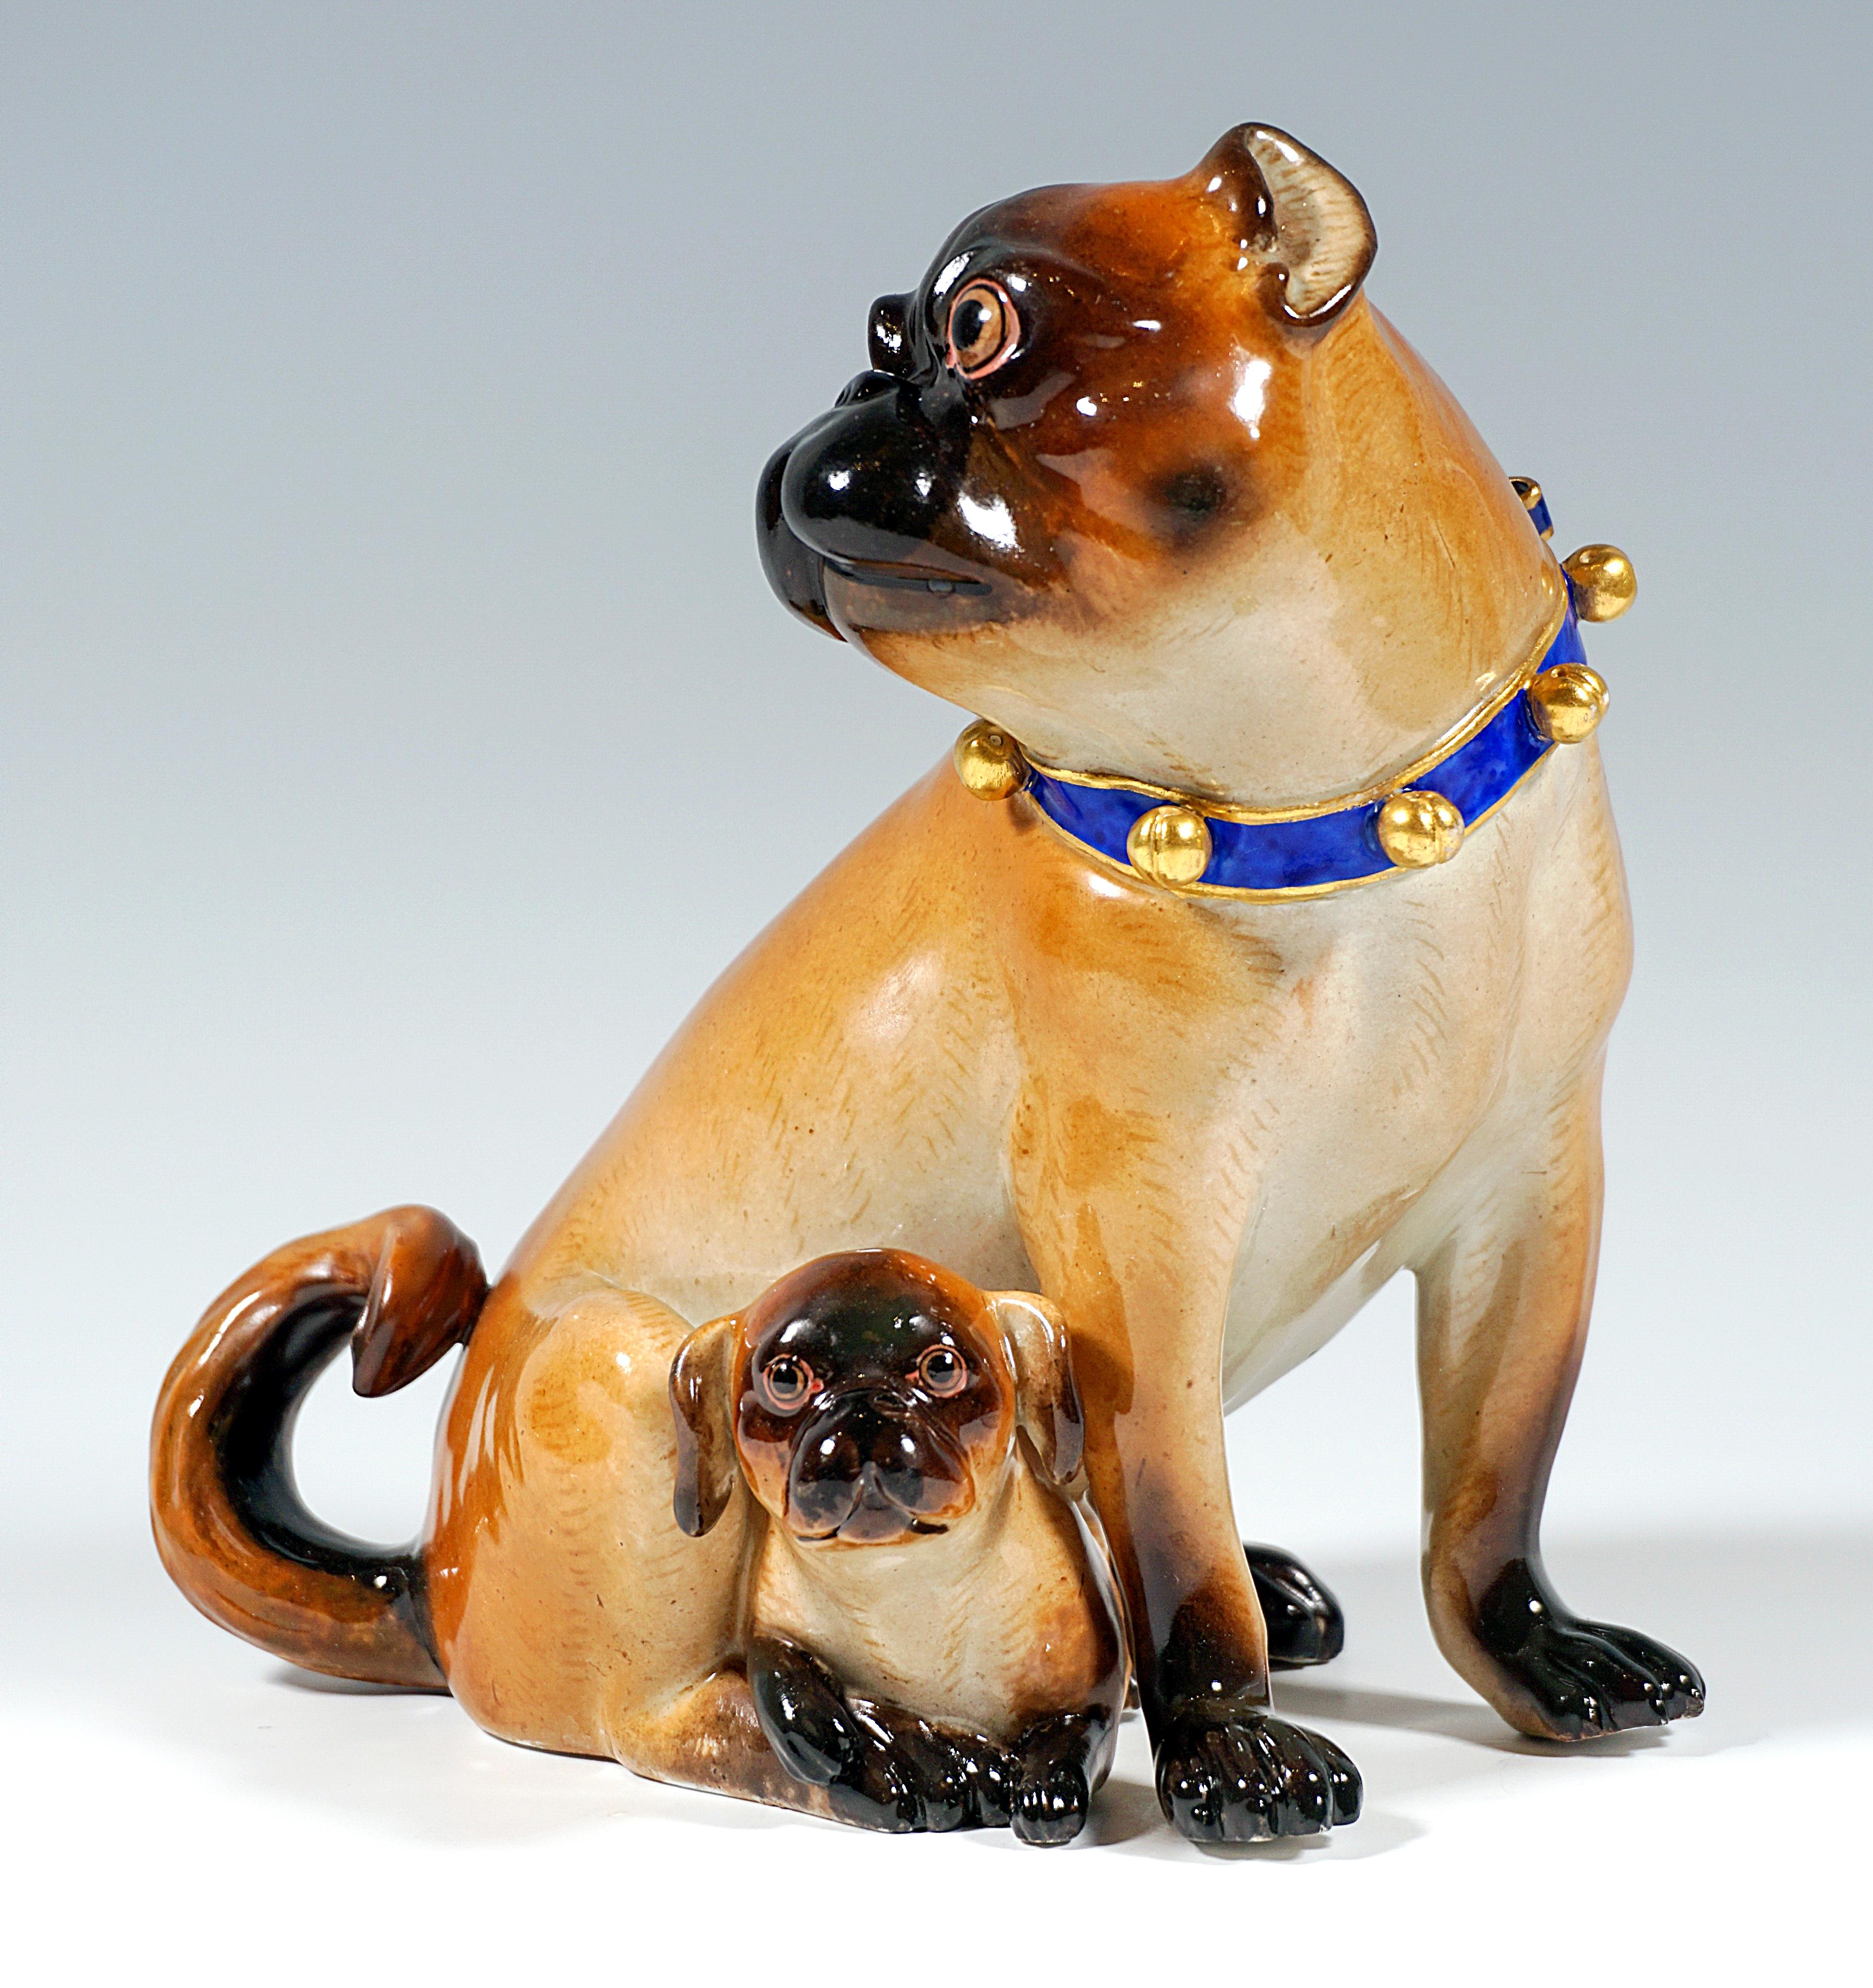 Lovingly designed group of animals:
Sitting female pug with jingle collar, looking attentively to the right, between her legs a small puppy looking out.

Designer:
Johann Joachim Kändler (1706 - 1775) chief sculptor at the Meissen manufactory